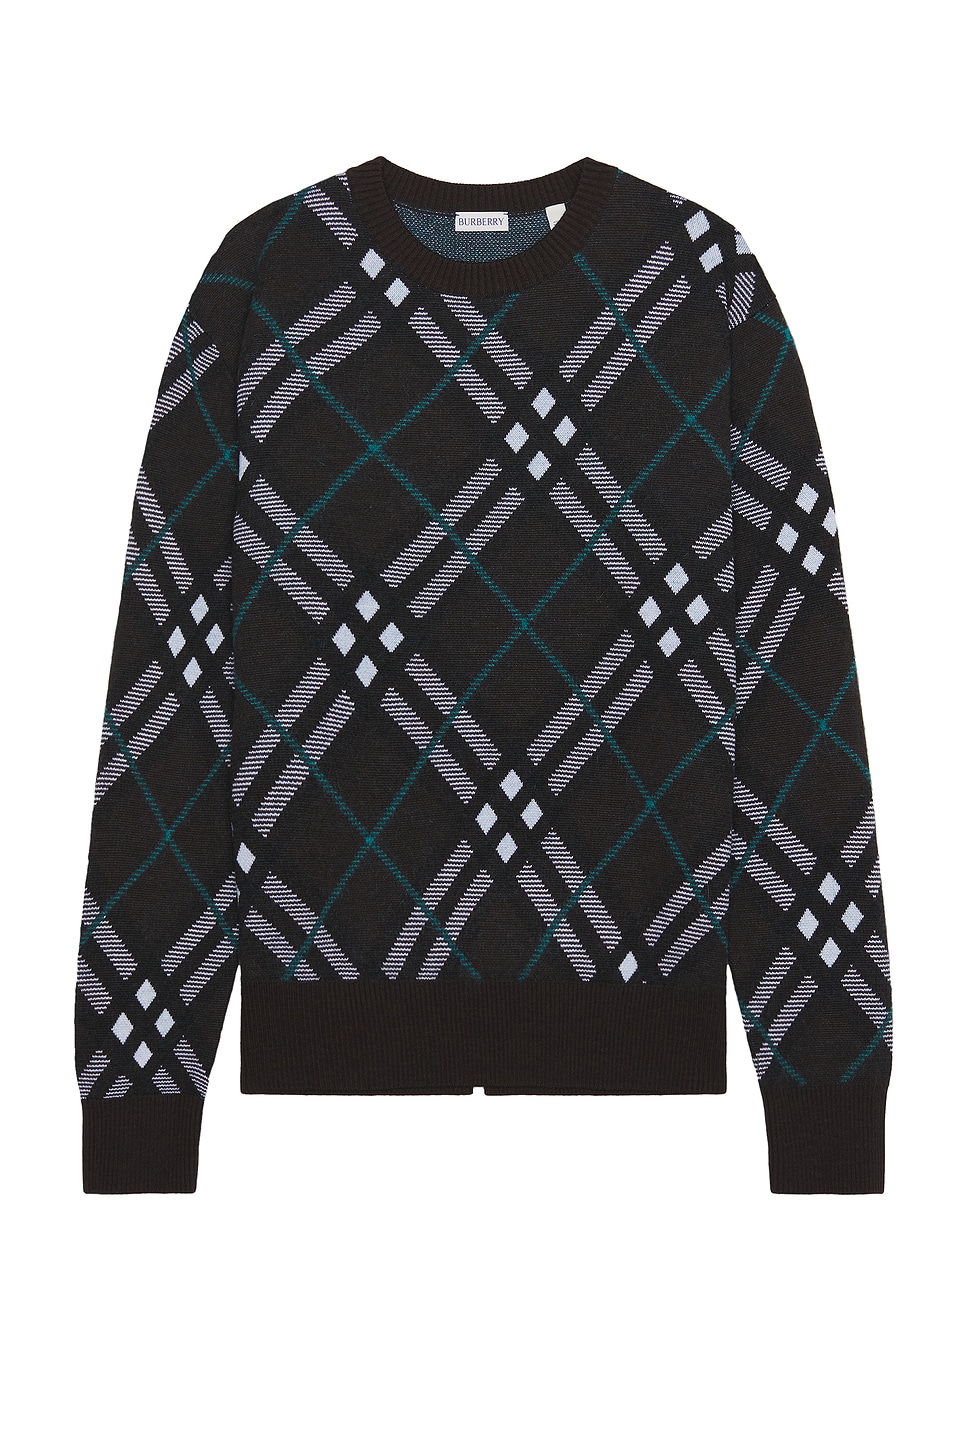 IP Check Sweater in Brown